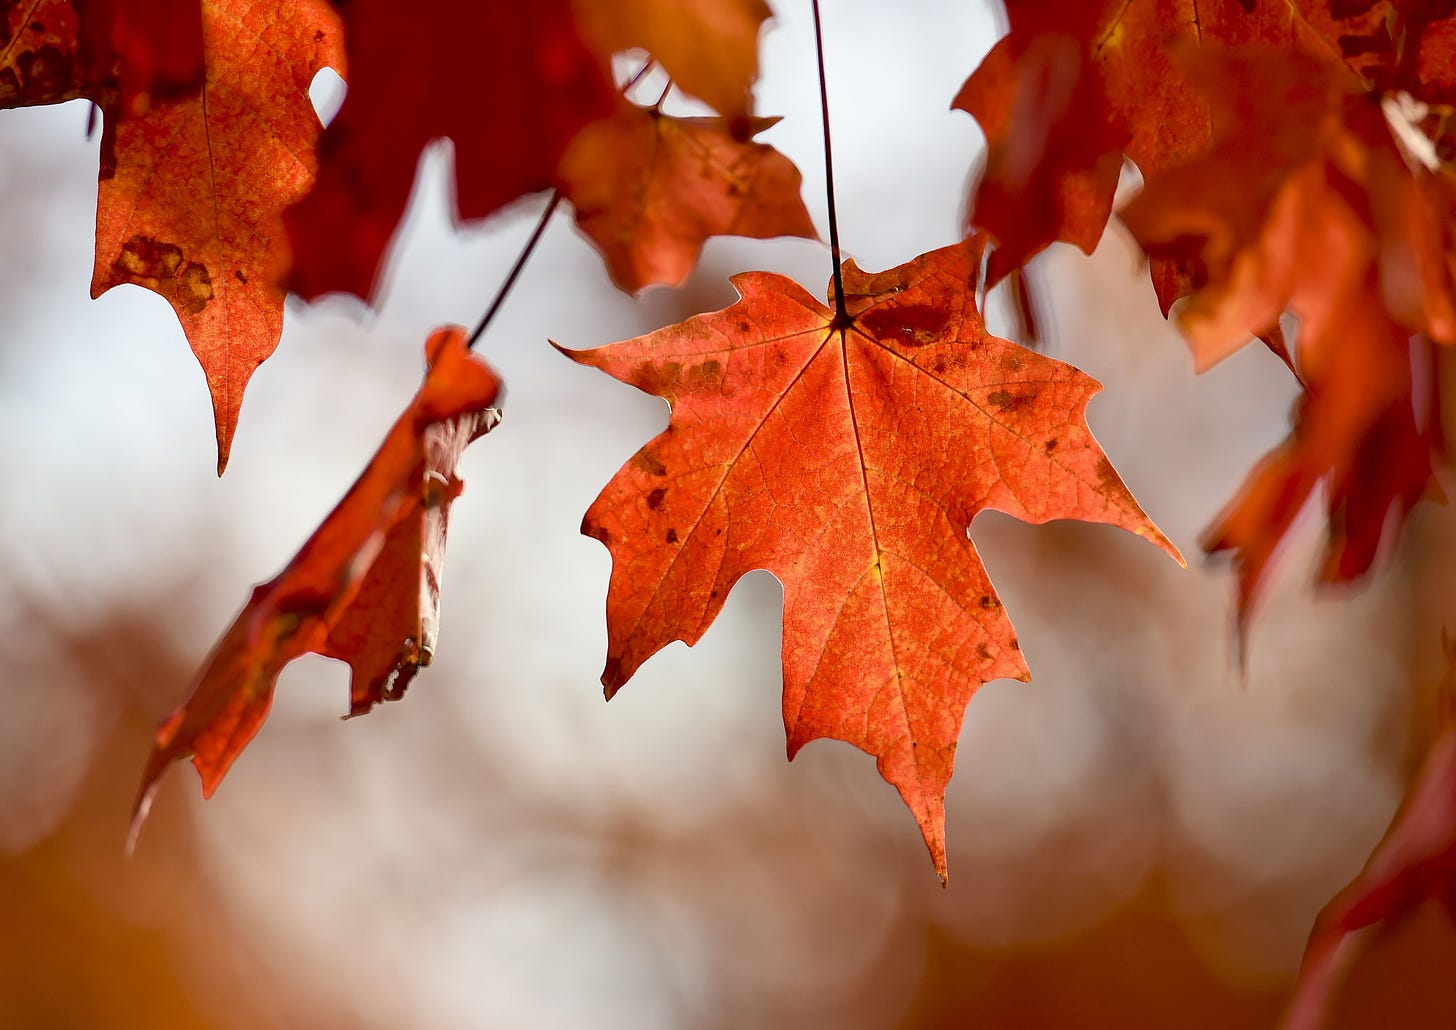 Why Do Leaves Change Color in the Fall, Anyway?